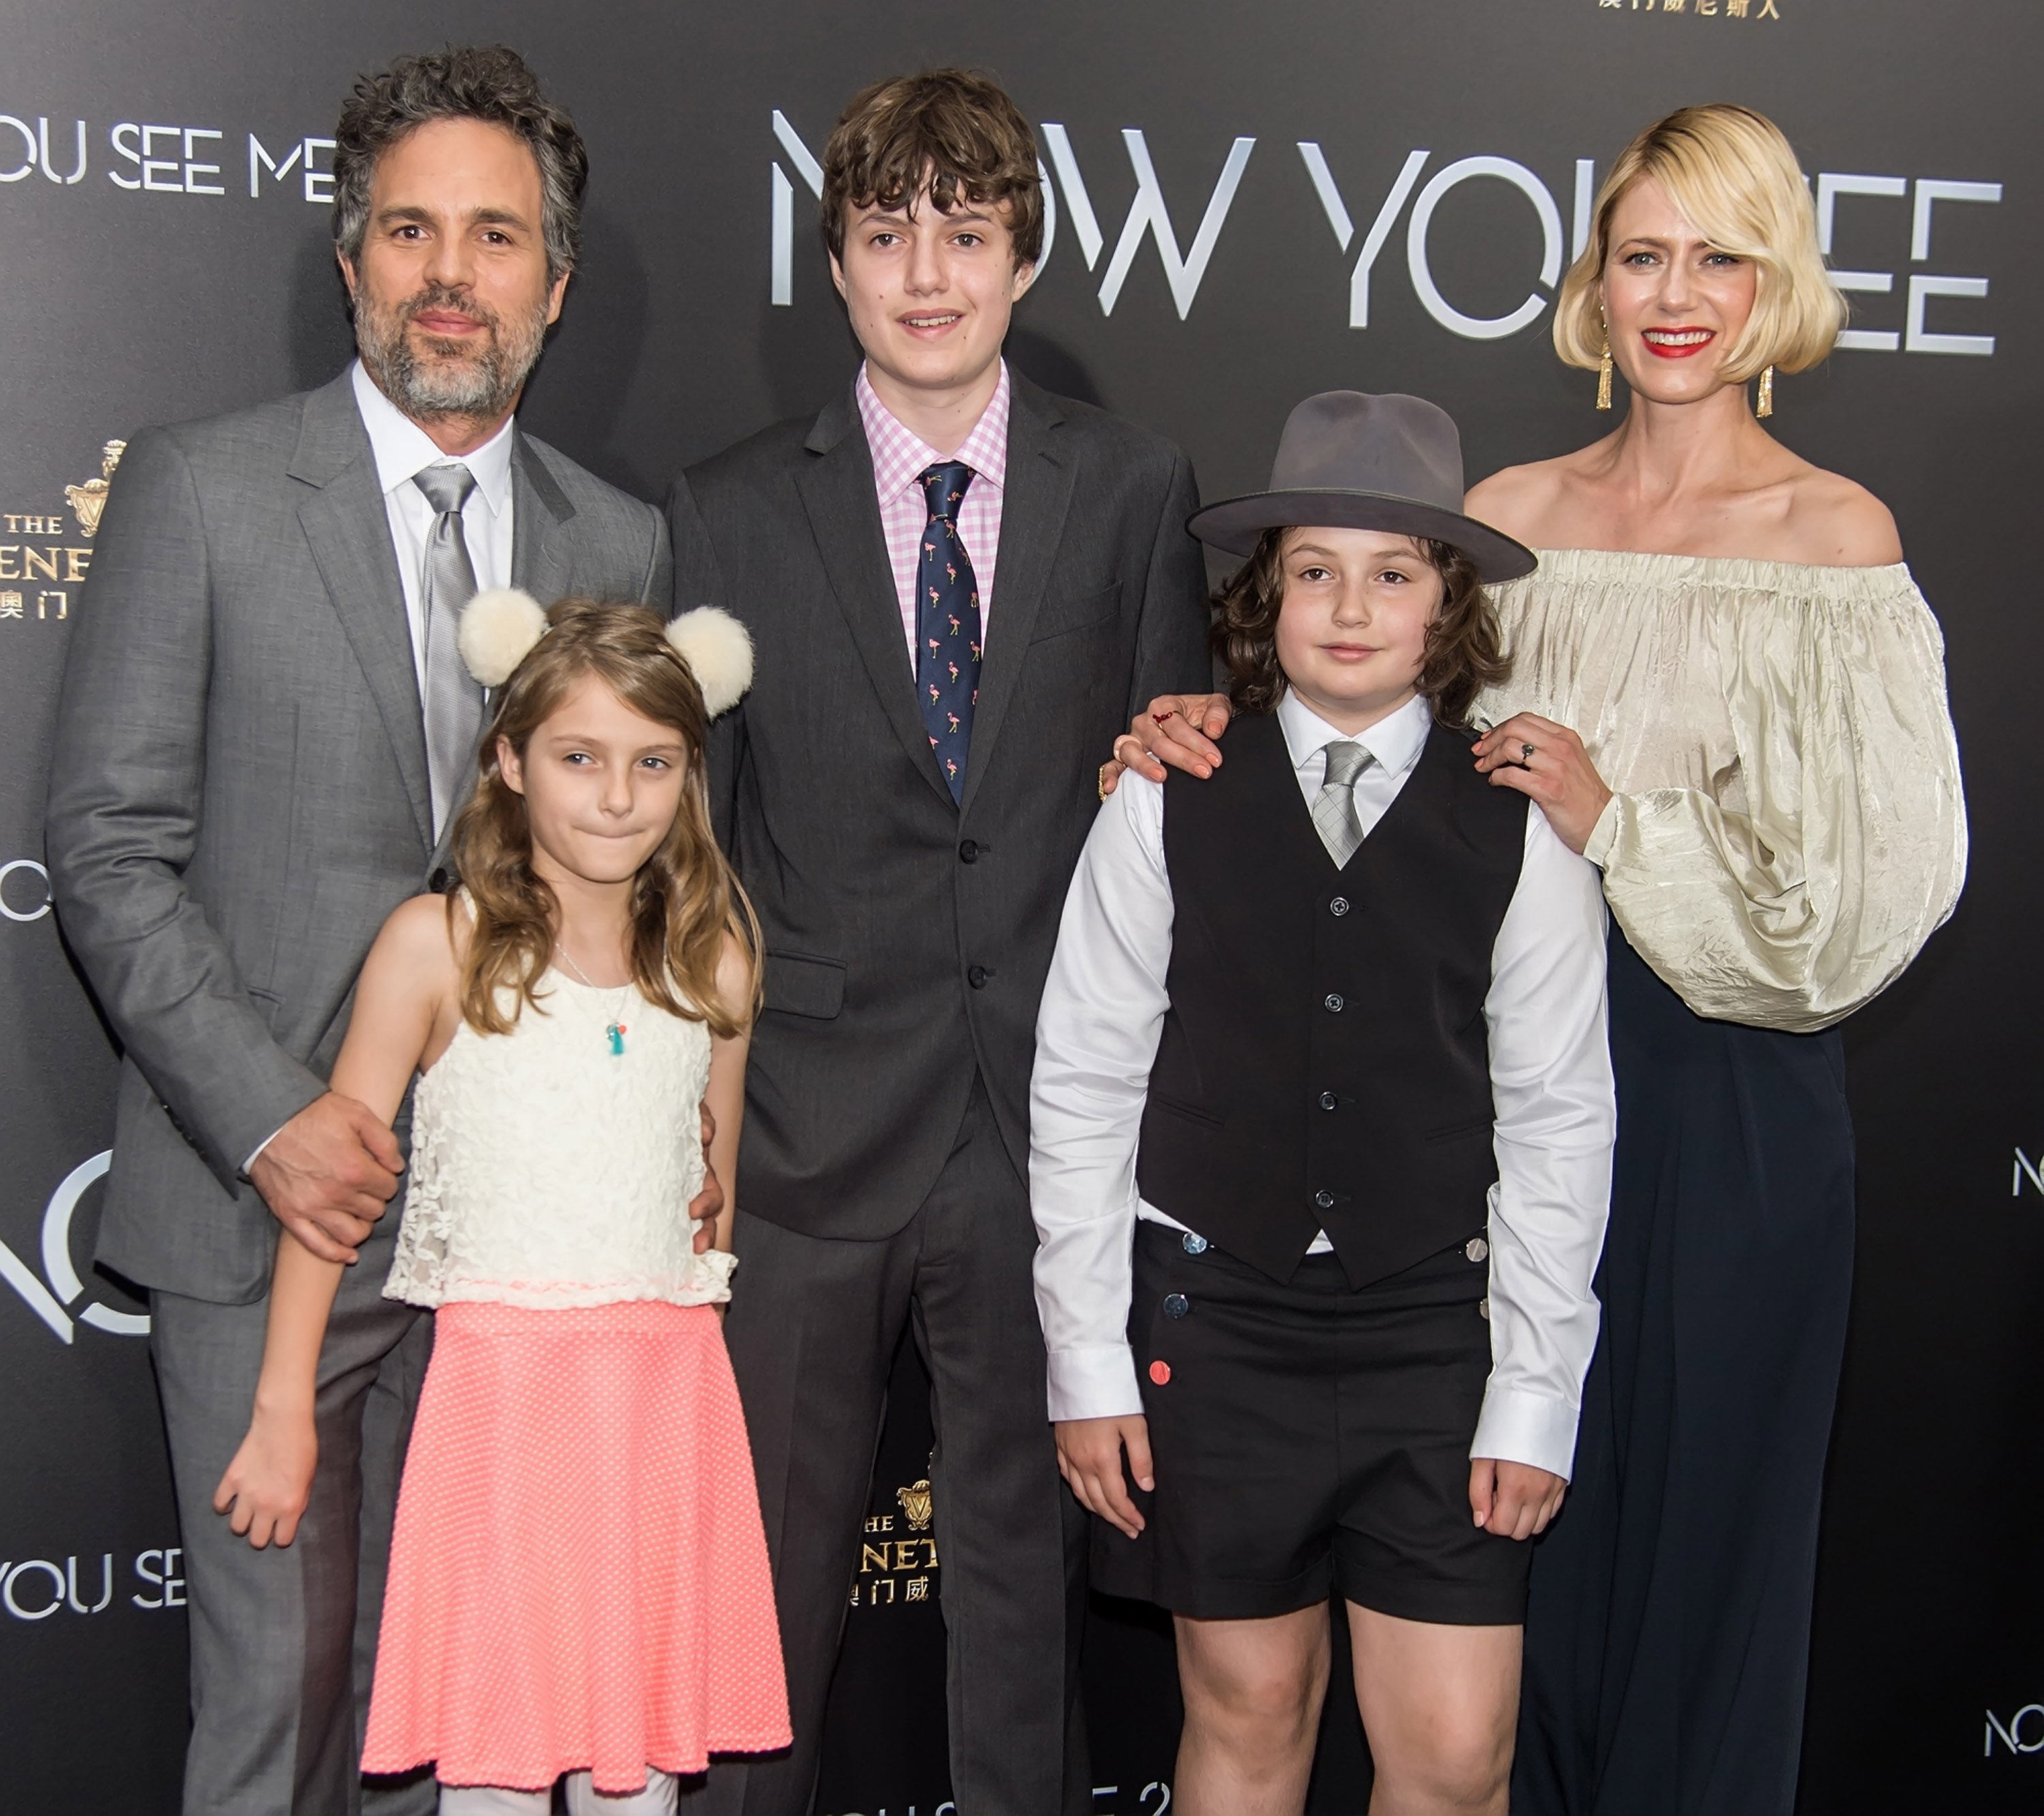 Actor Mark Ruffalo, wife Sunrise Coigney and children Odette Ruffalo, Keen Ruffalo and Bella Ruffalo at the 'Now You See Me 2' World Premiere at AMC Loews Lincoln Square 13 theater on June 6, 2016 in New York City. | Source: Getty Images